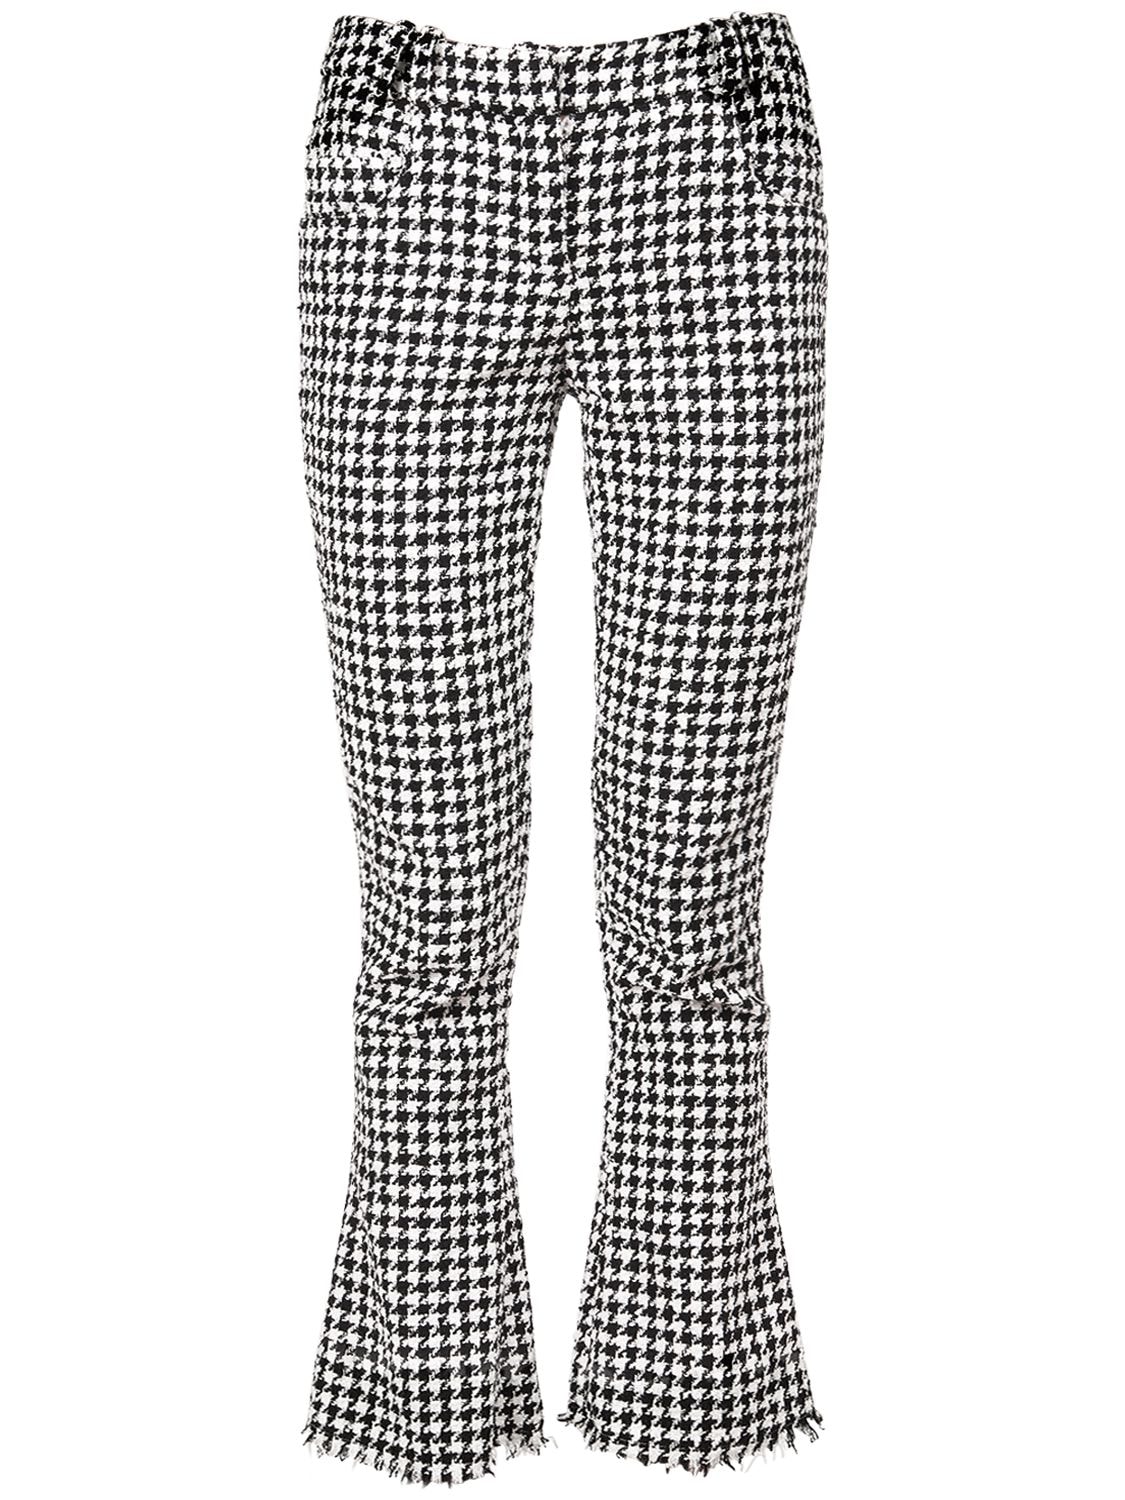 BALMAIN HOUNDSTOOTH COTTON BLEND FLARED PANTS,74IL5Z067-R0FC0